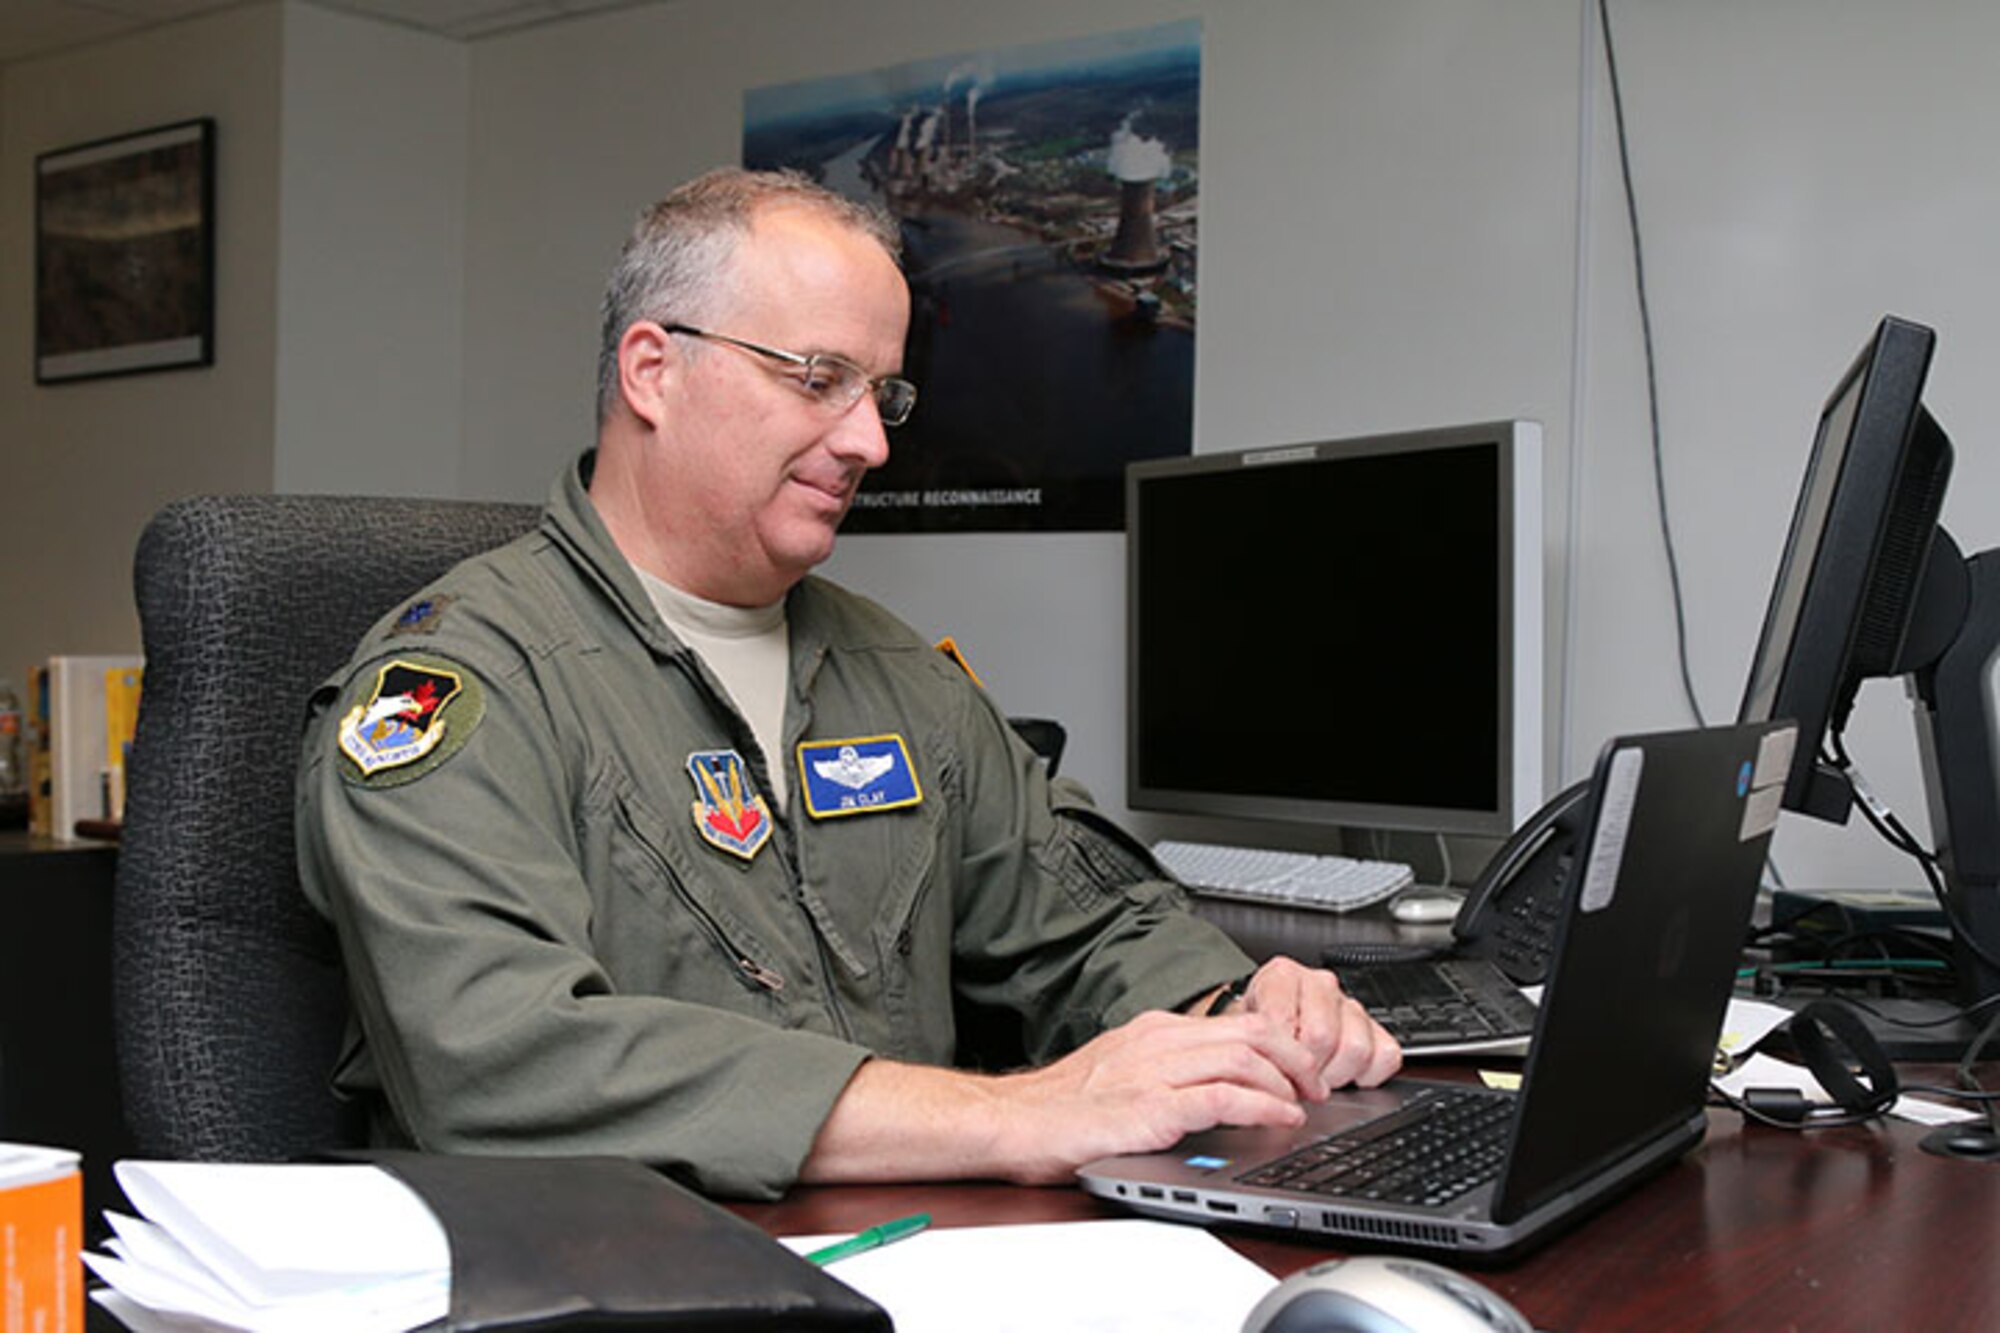 Lt. Col. Jim Clay, 1st Air Force director of Civil Air Patrol operations, is
one of several Hurricane Michael evacuees now working in CAP National
Headquarters at Maxwell Air Force Base, Ala. His temporary office is set up
in CAP's National Operations Center. (Civil Air Patrol photo by Susan
Schneider)